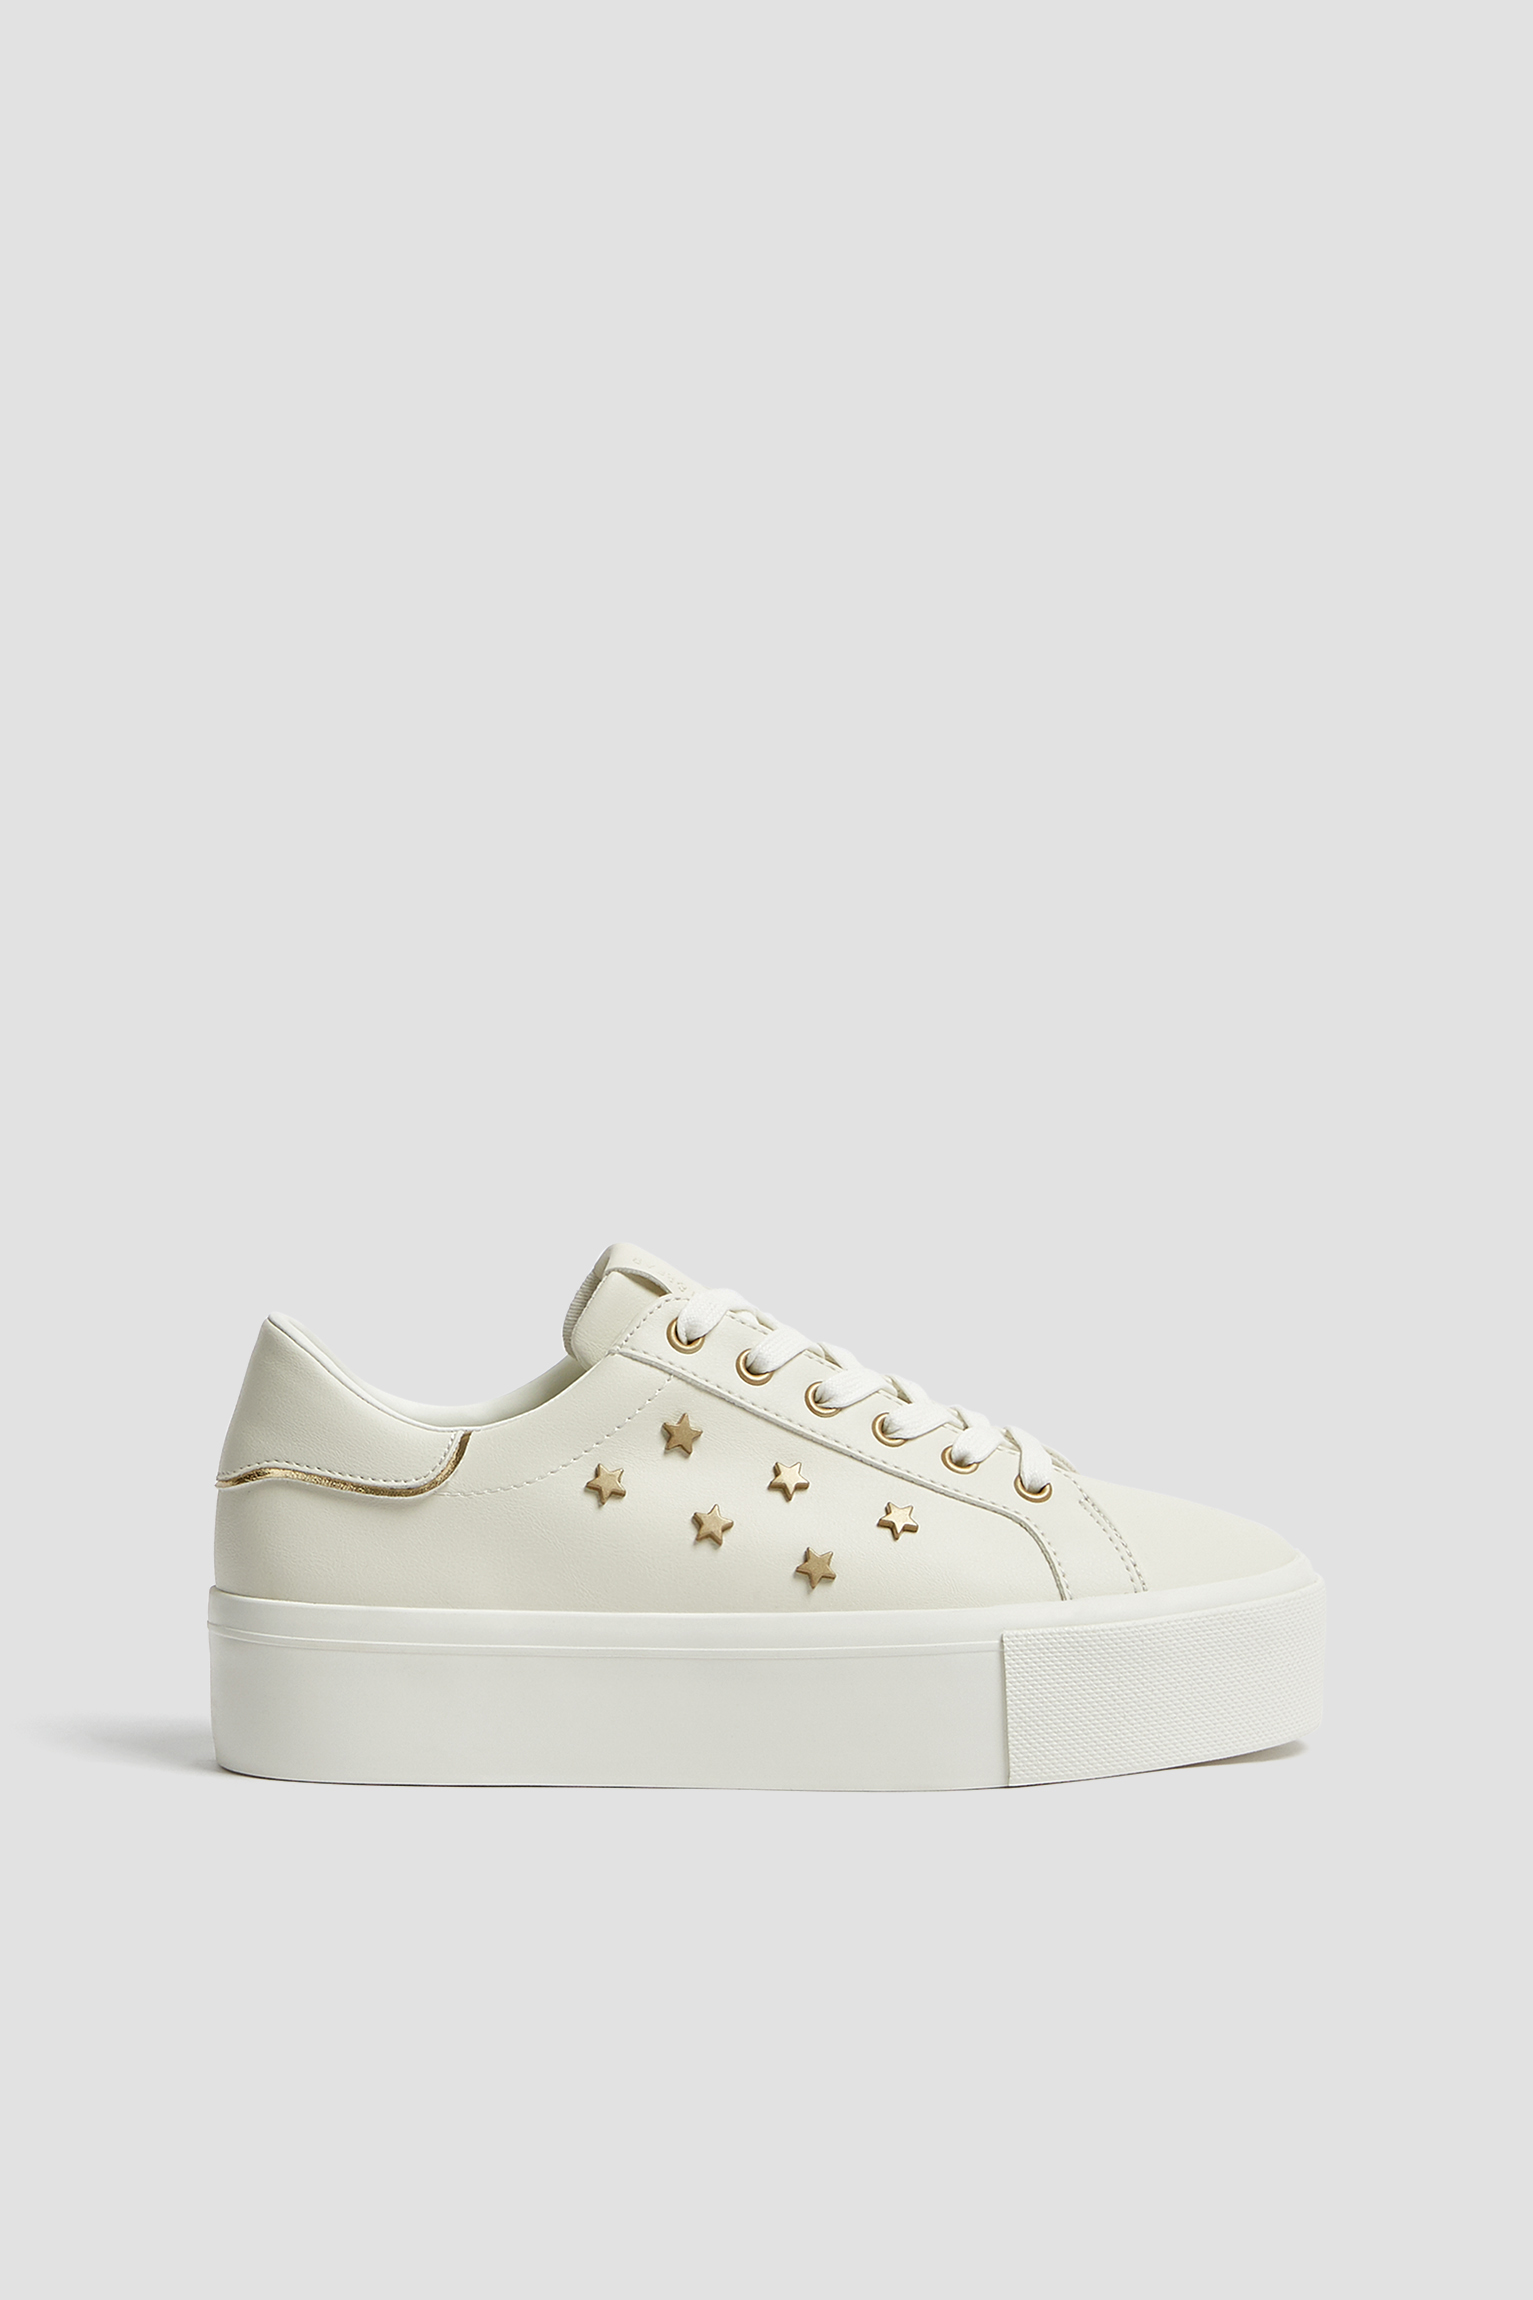 chunky sneakers pull and bear